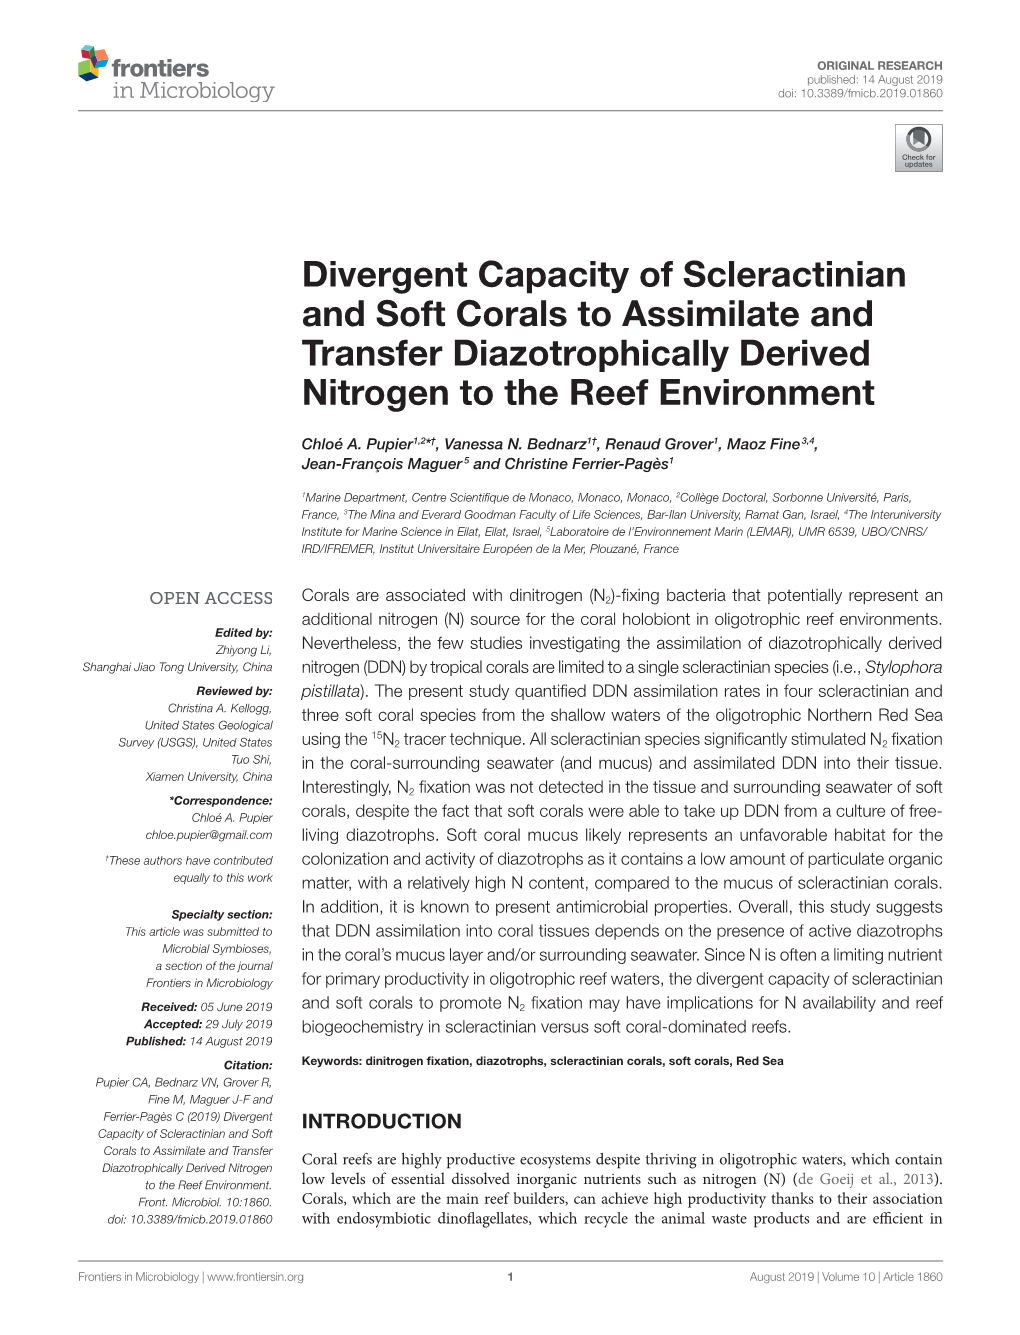 Divergent Capacity of Scleractinian and Soft Corals to Assimilate and Transfer Diazotrophically Derived Nitrogen to the Reef Environment